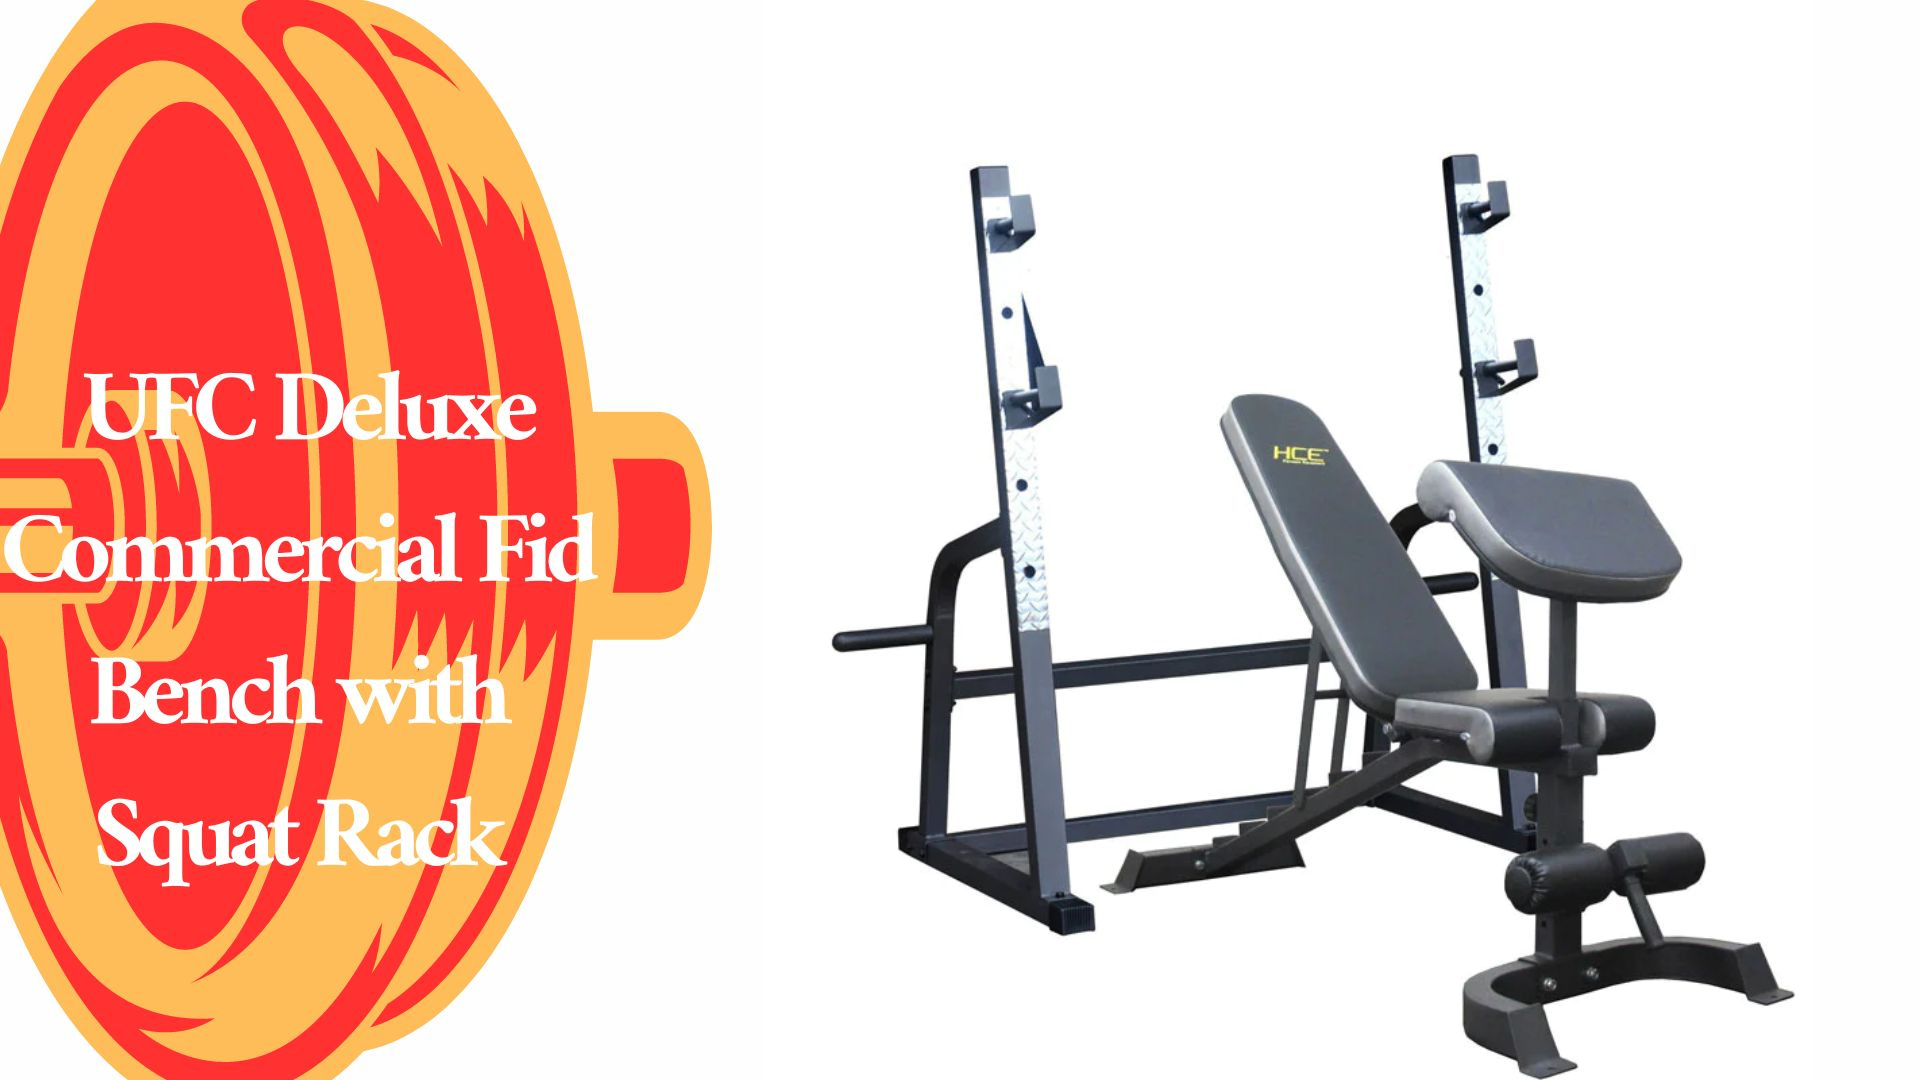 the UFC Deluxe Commercial Fid Bench with Squat Rack